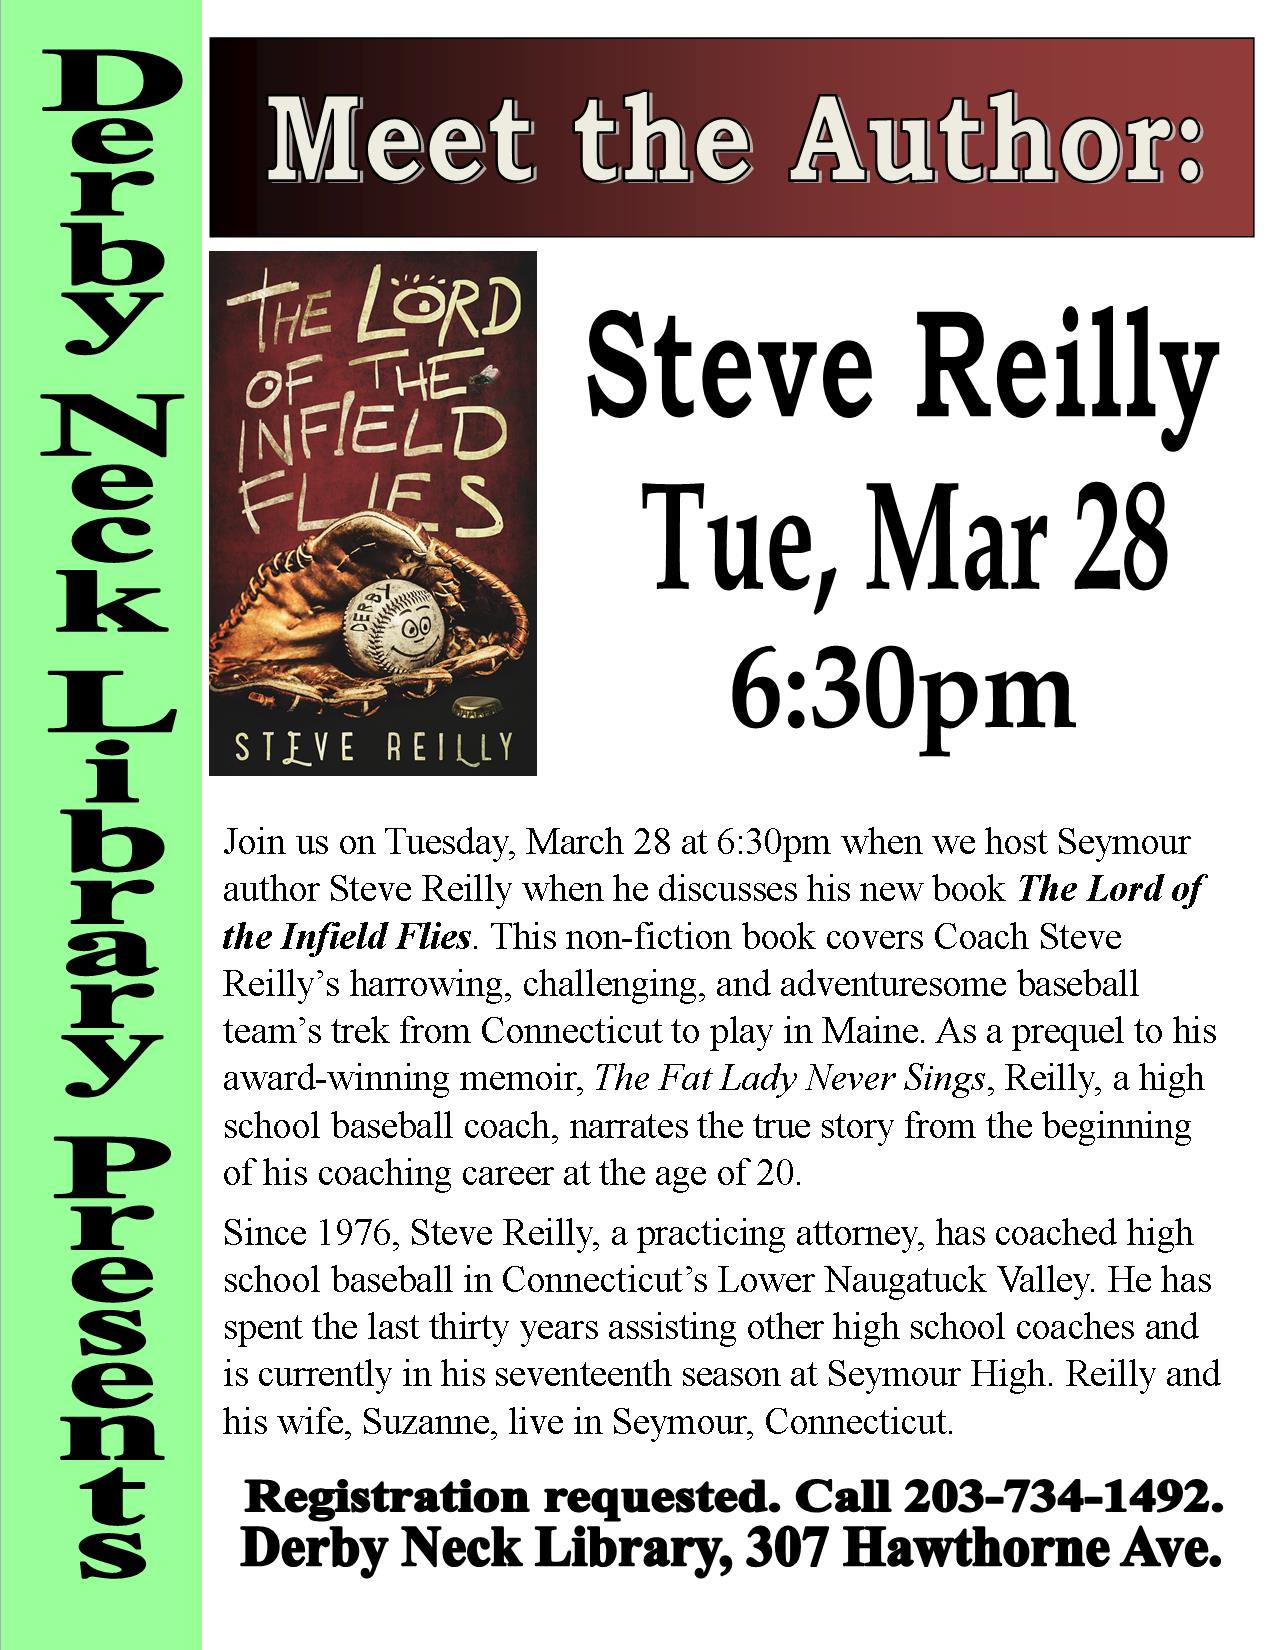 Meet the Author - Steve Reilly: The Lord of the Infield Flies